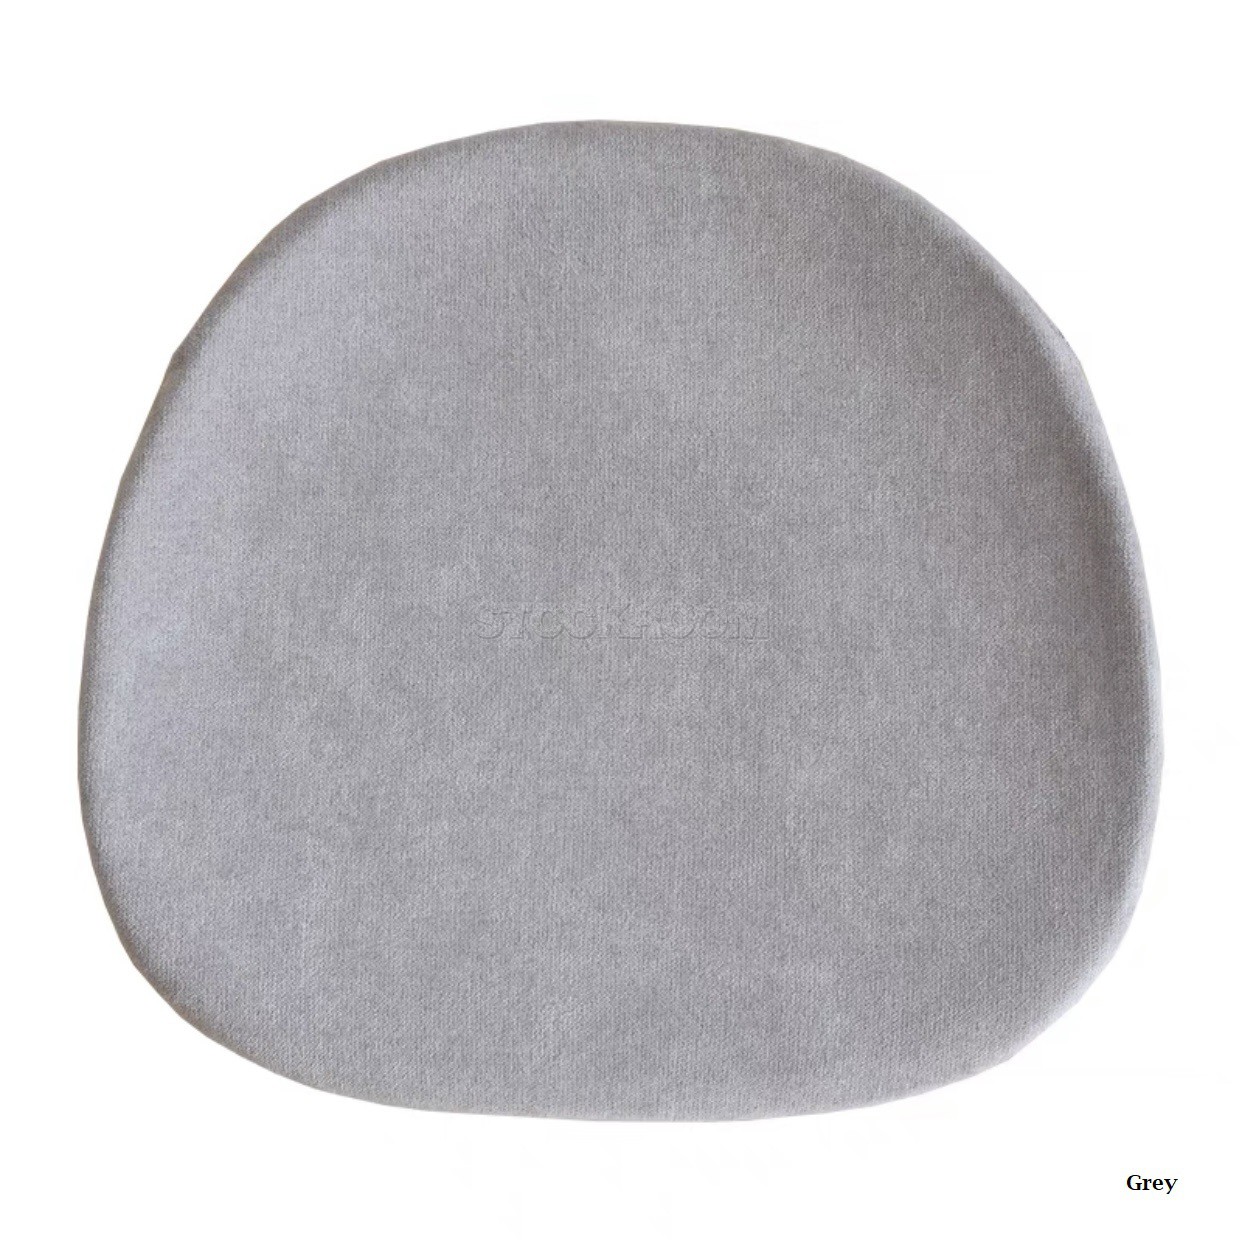 Eames Style Seat Pad